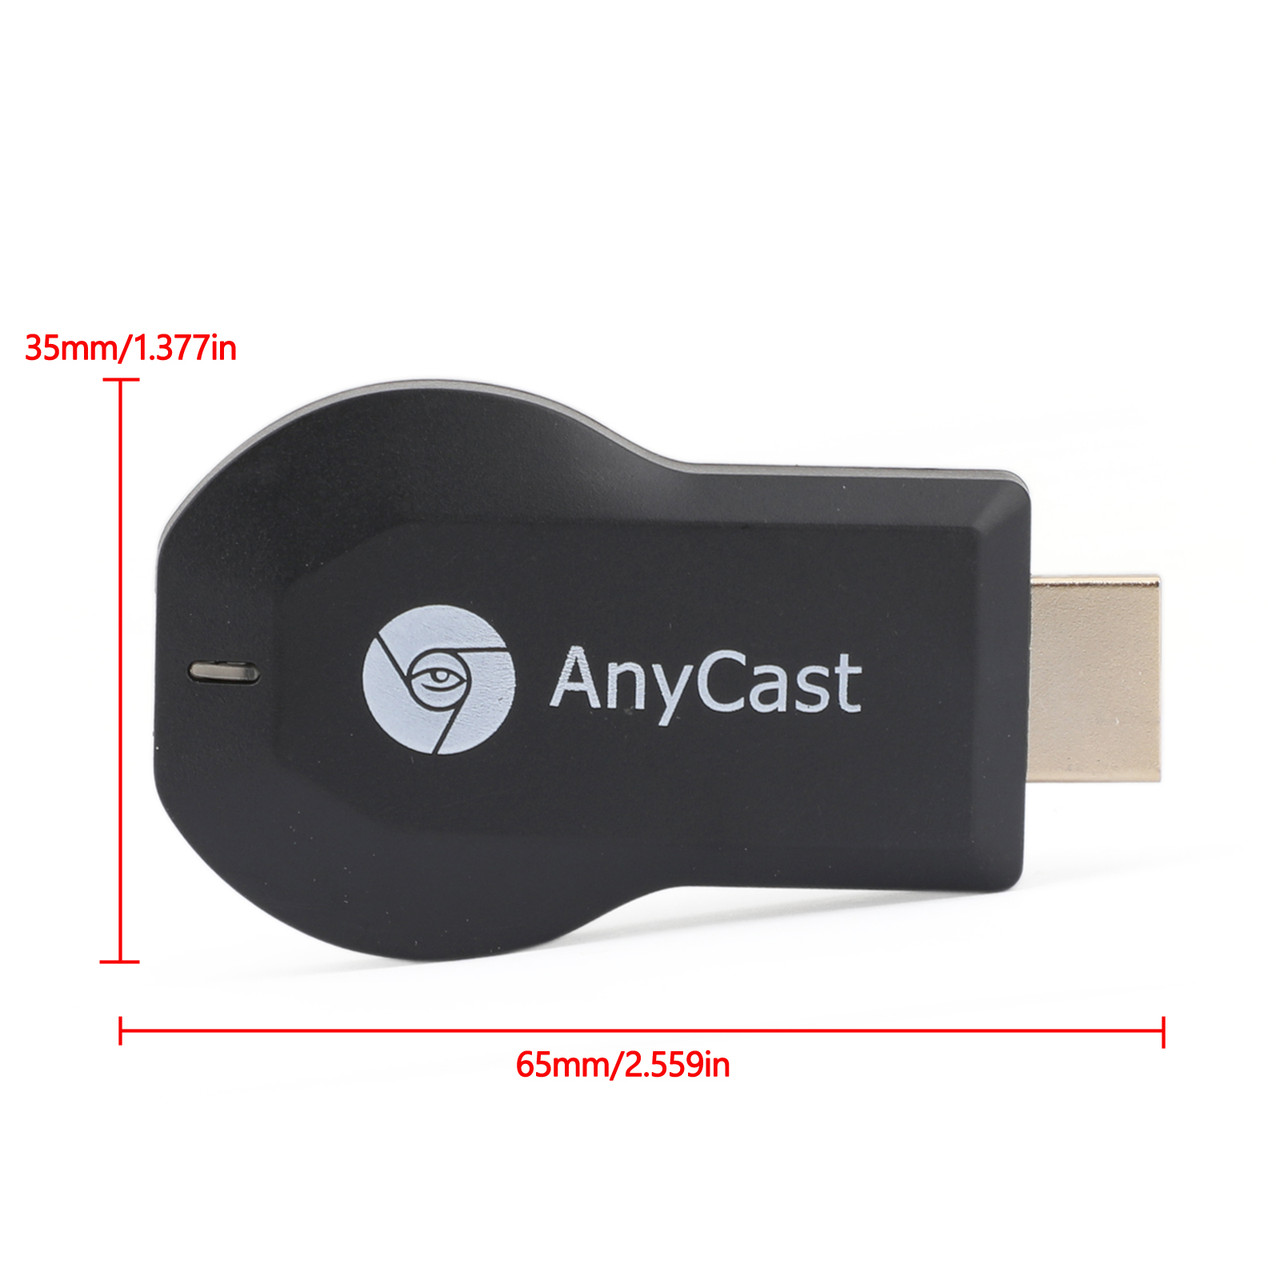 Anycast M9+ Air Play HD TV Stick WIFI Display Receiver Dongle Streamer